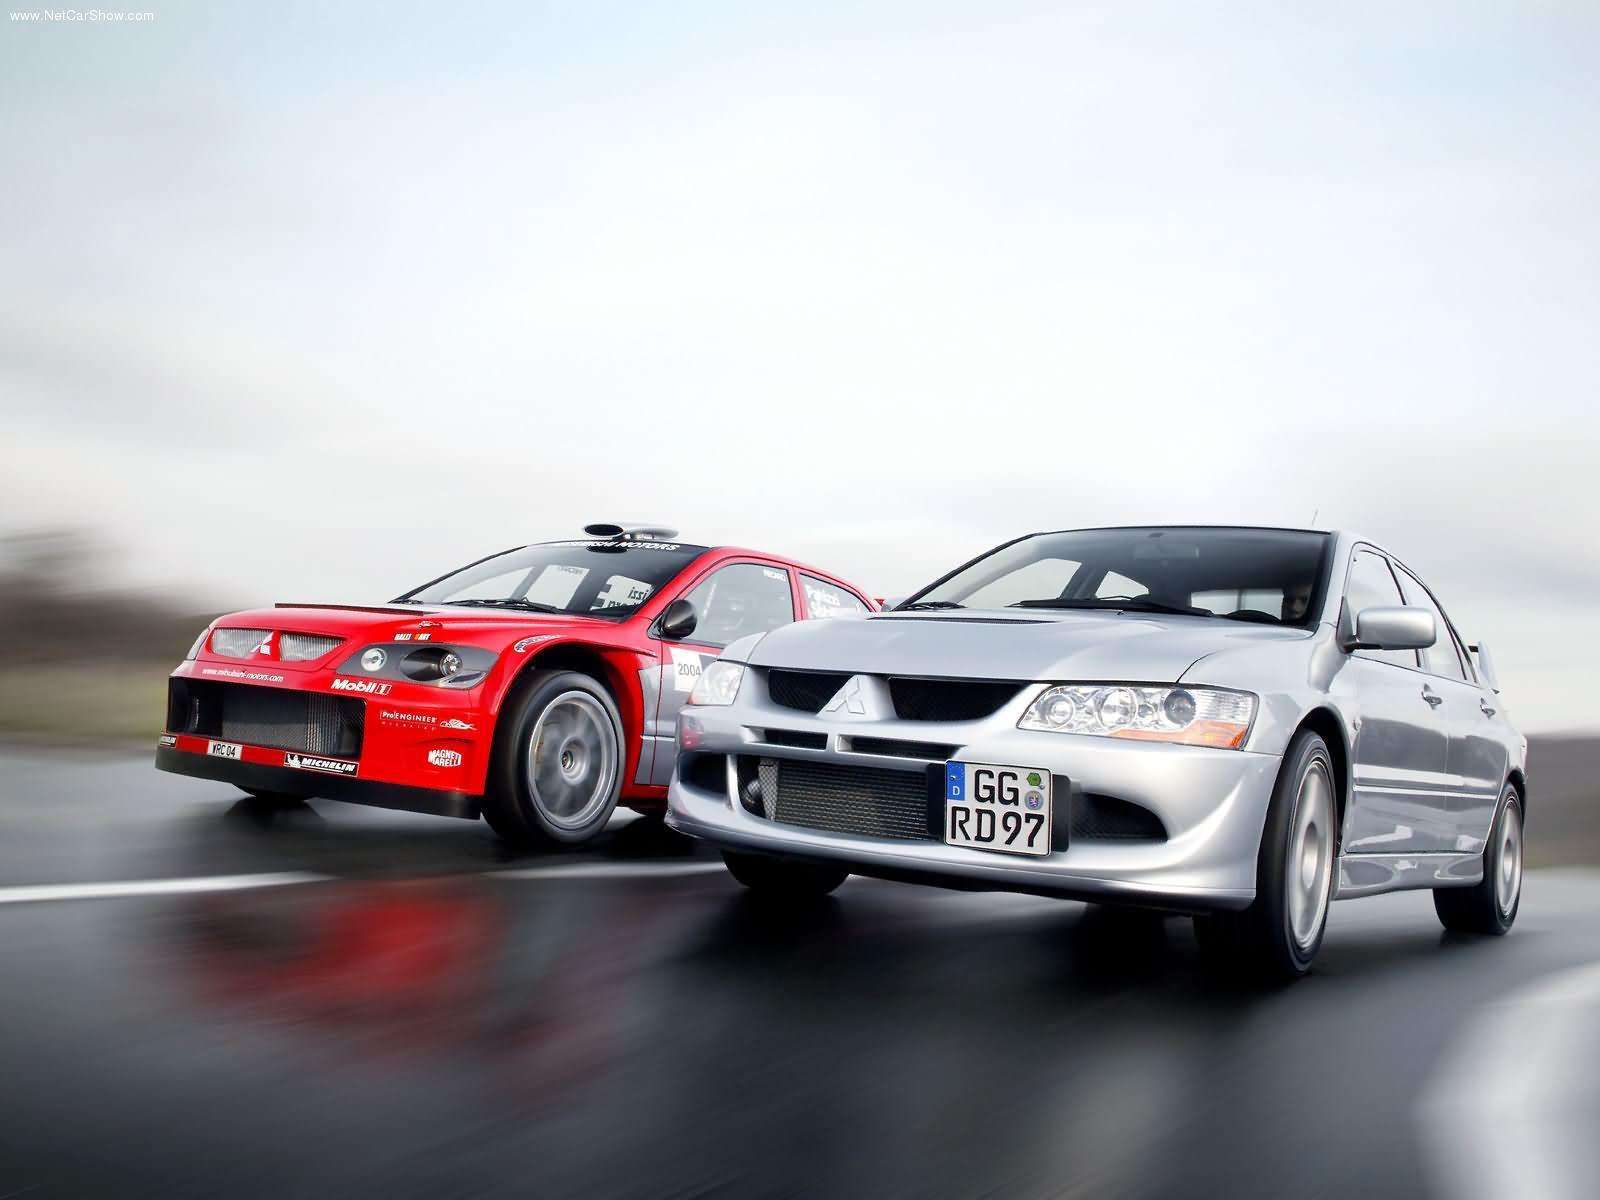 Autos Auto Racing on Vehicles Red White Autos Racing Car Hd Wallpaper Of Cars   Trucks